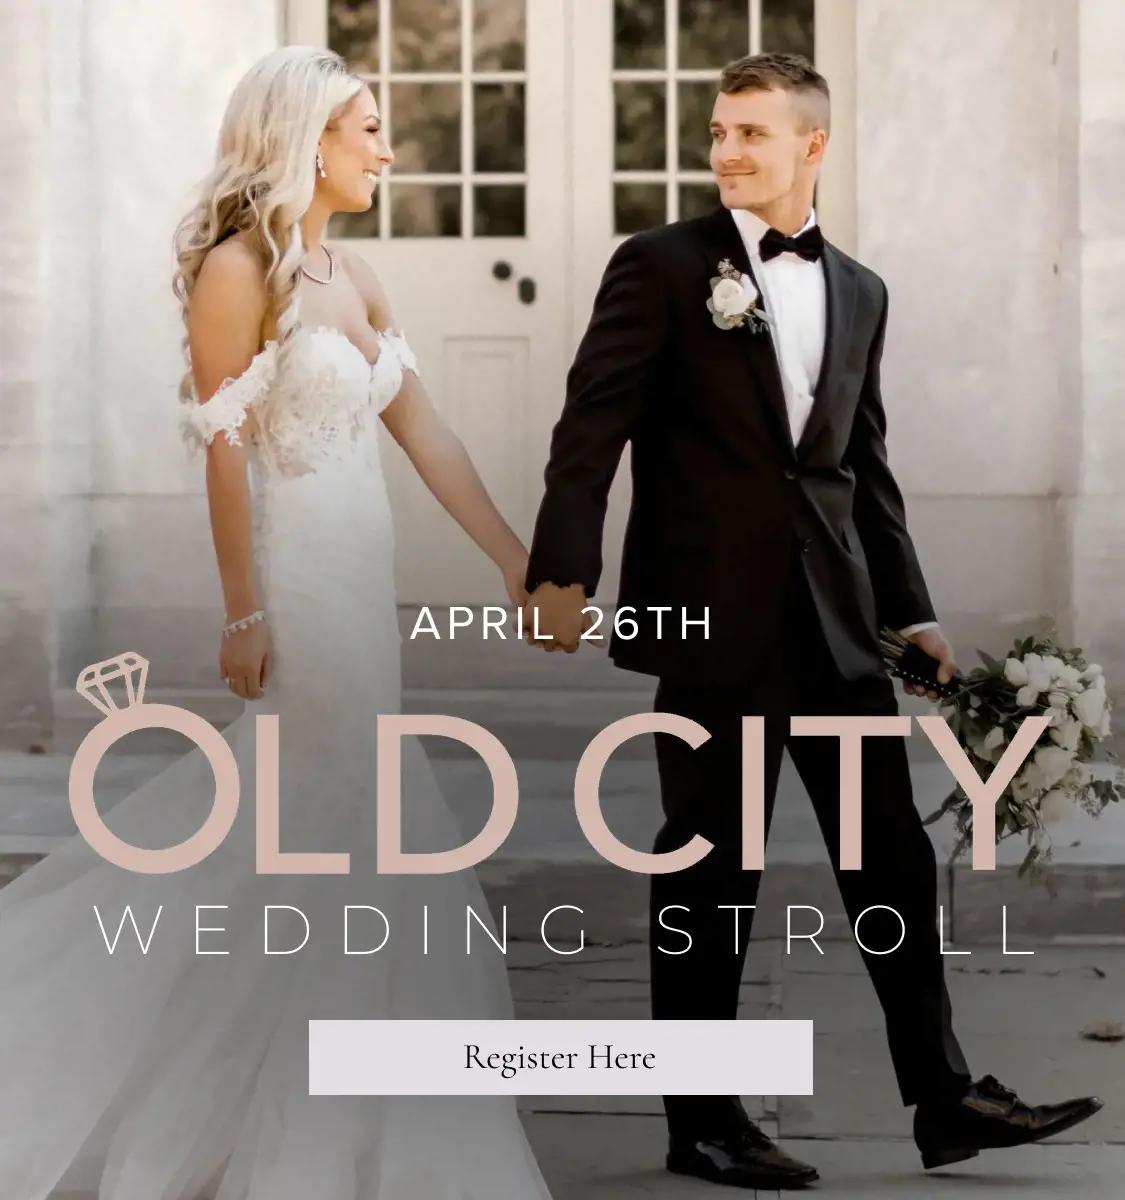 "Old City Wedding Stroll Event" banner for mobile